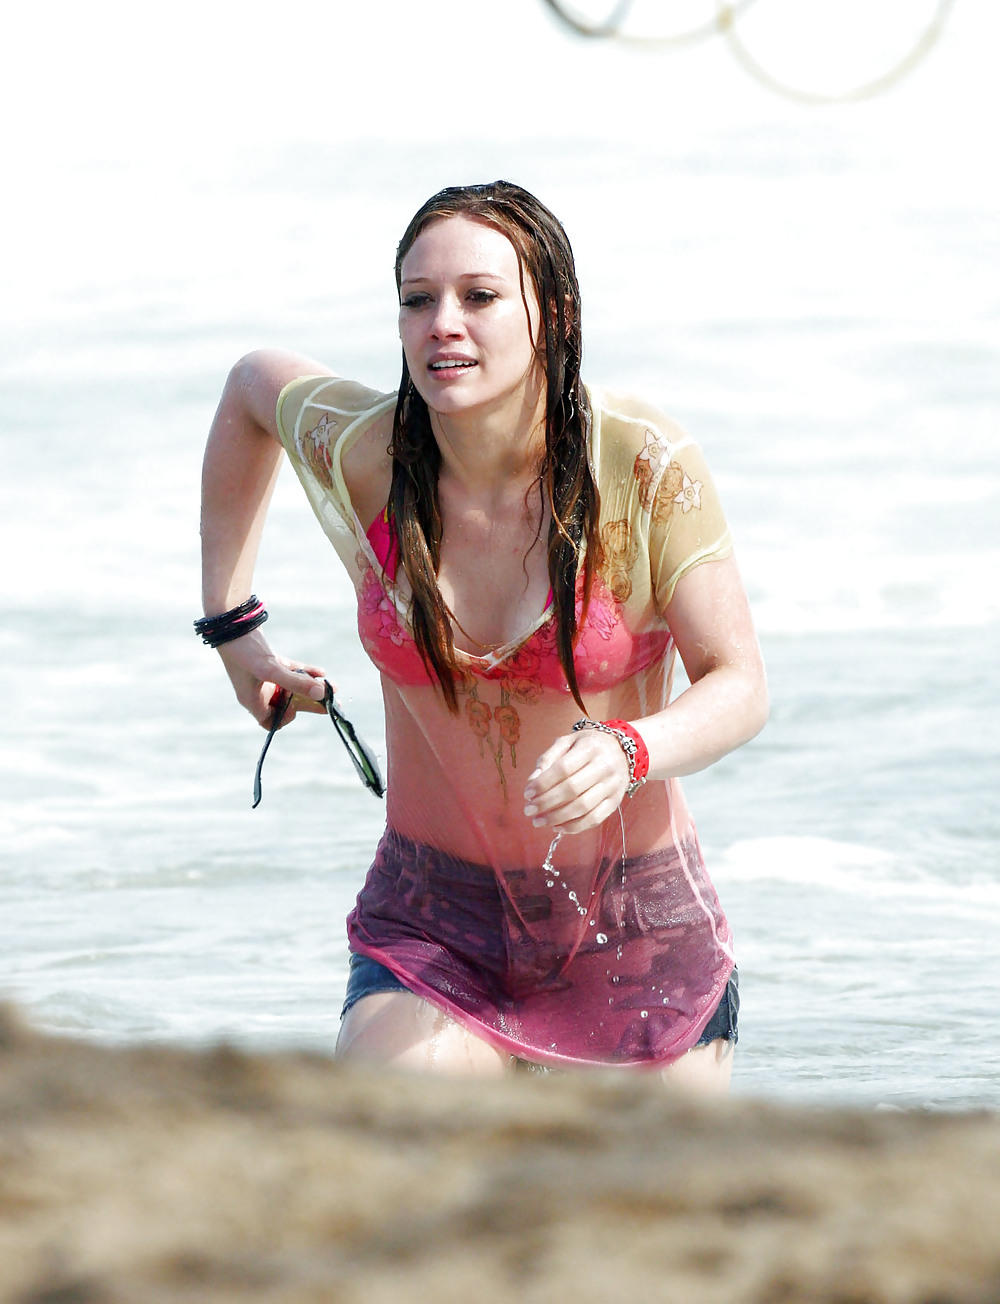 Hilary Duff at the Beach playing around in a wet shirt #7220924